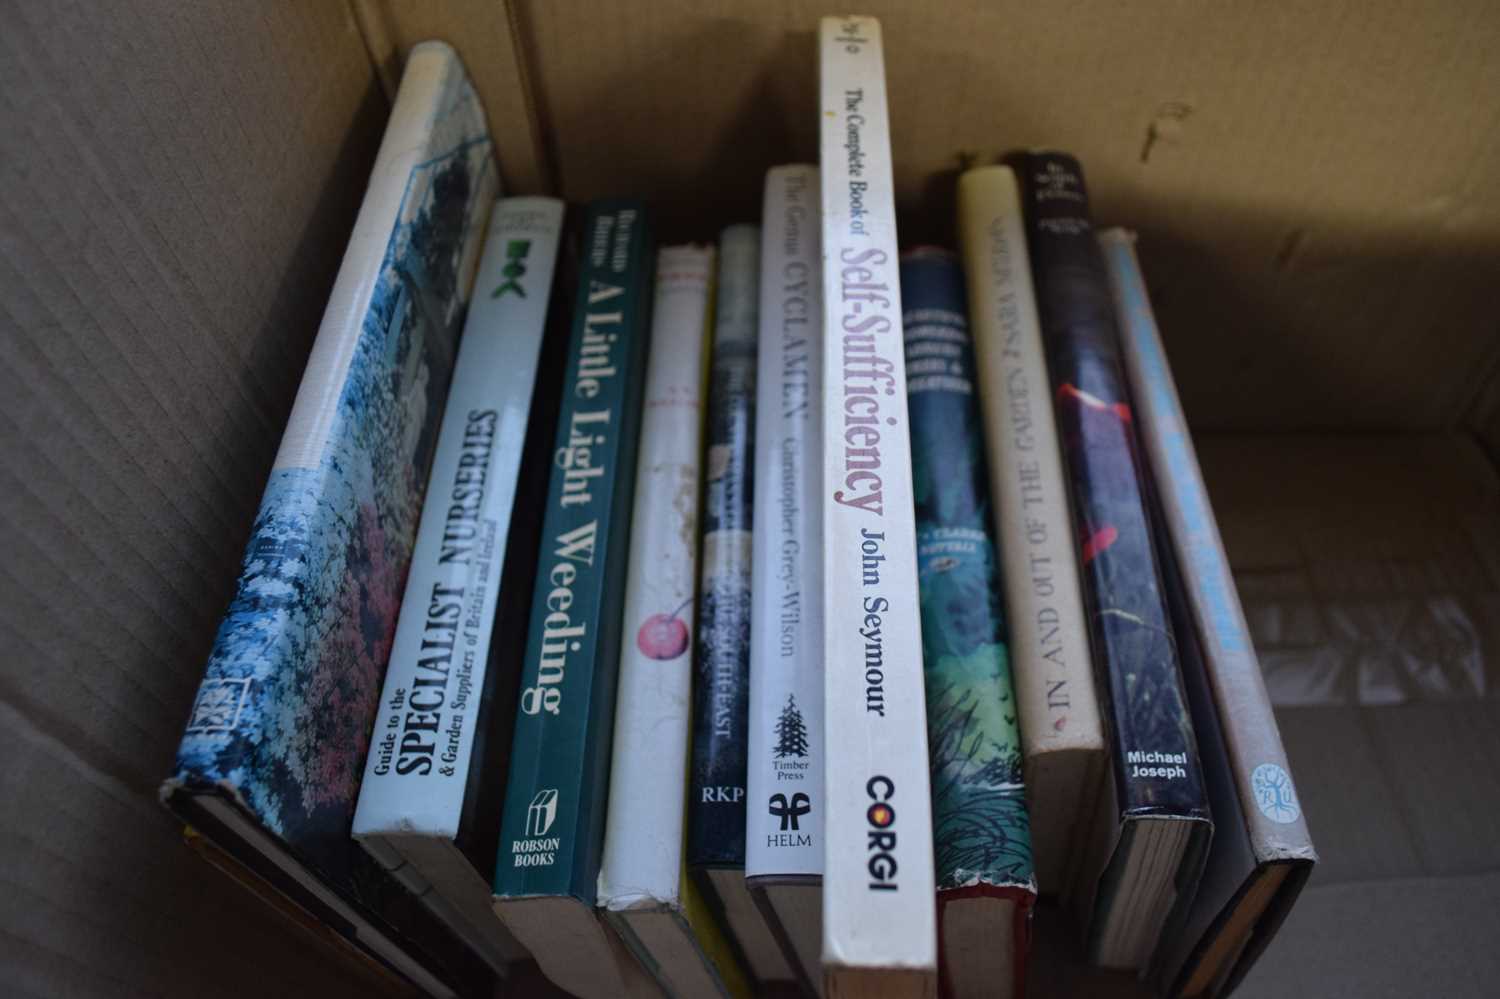 12 small format country and gardening books to include The Complete Book of Self-Sufficiency, The - Image 3 of 4